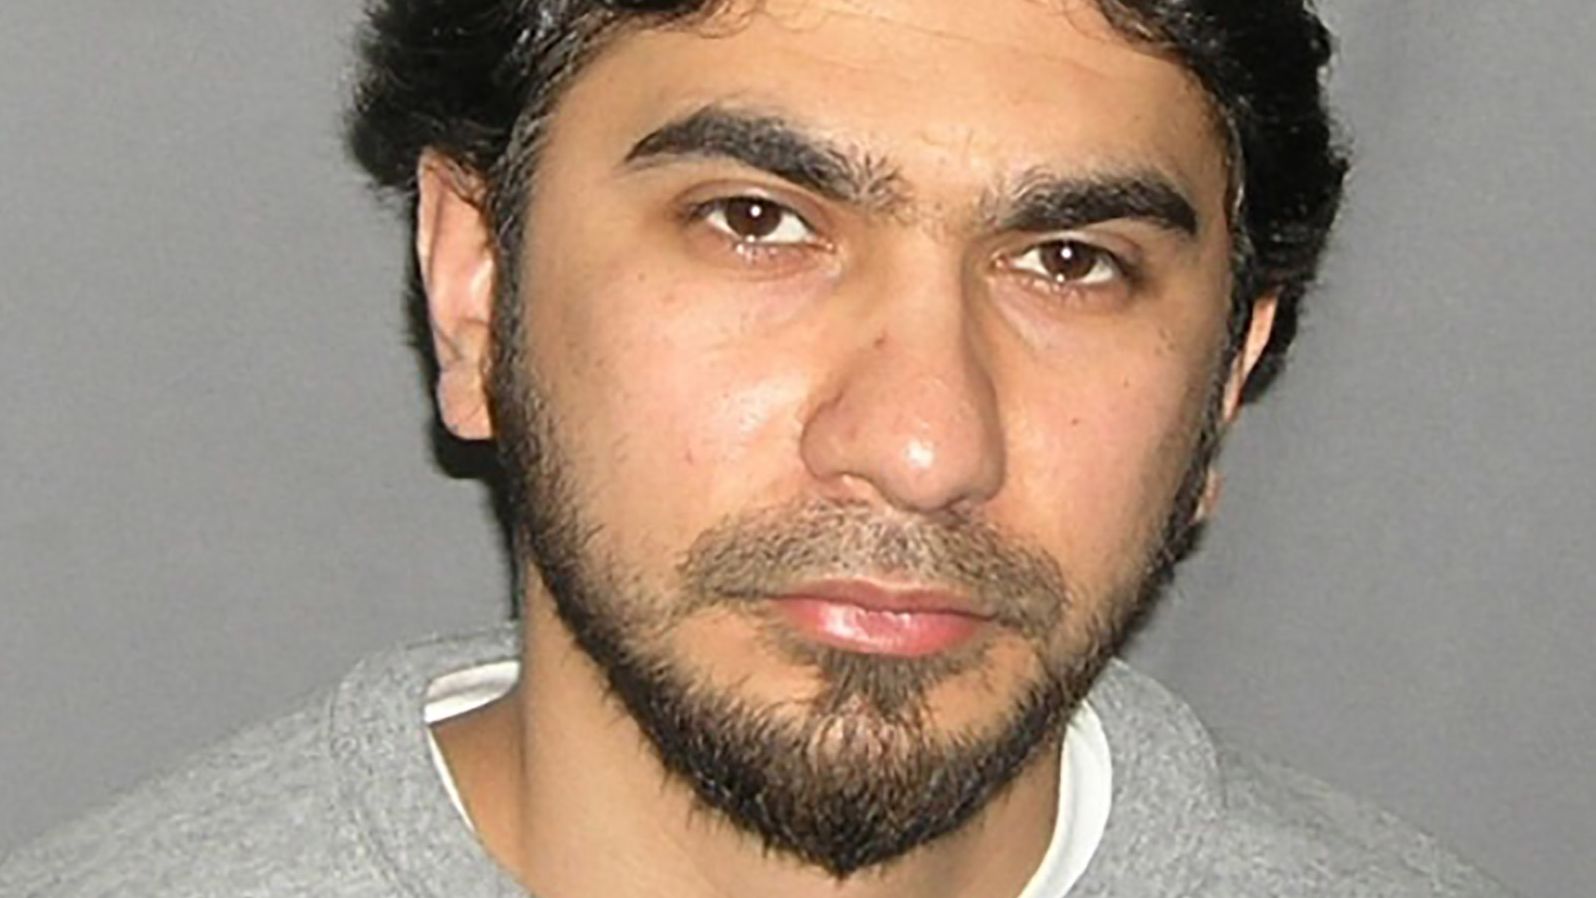 Faisal Shahzad is serving a life sentence for trying to detonate a car bomb in New York's Times Square in May 2010.